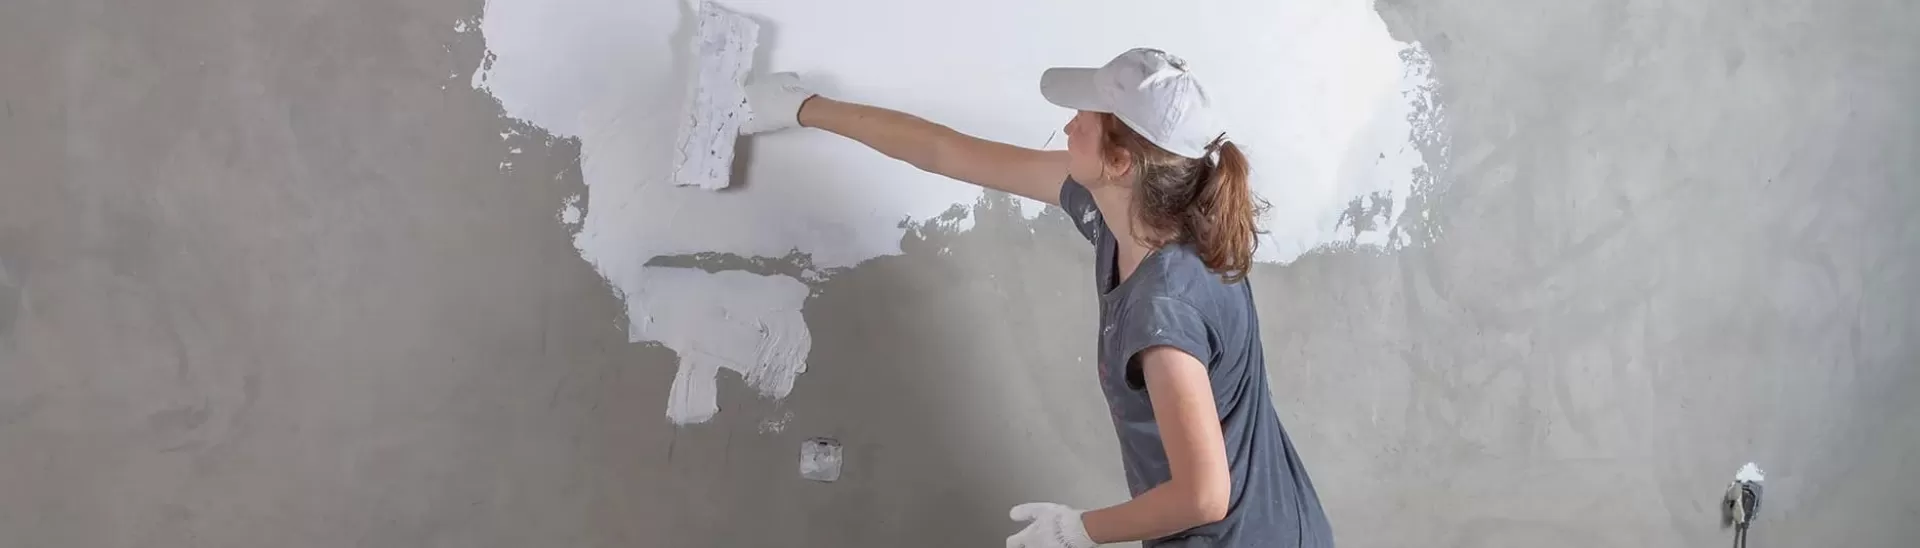 Acrylic Wall Putty for a Long Lasting Wall Finish - Nerolac